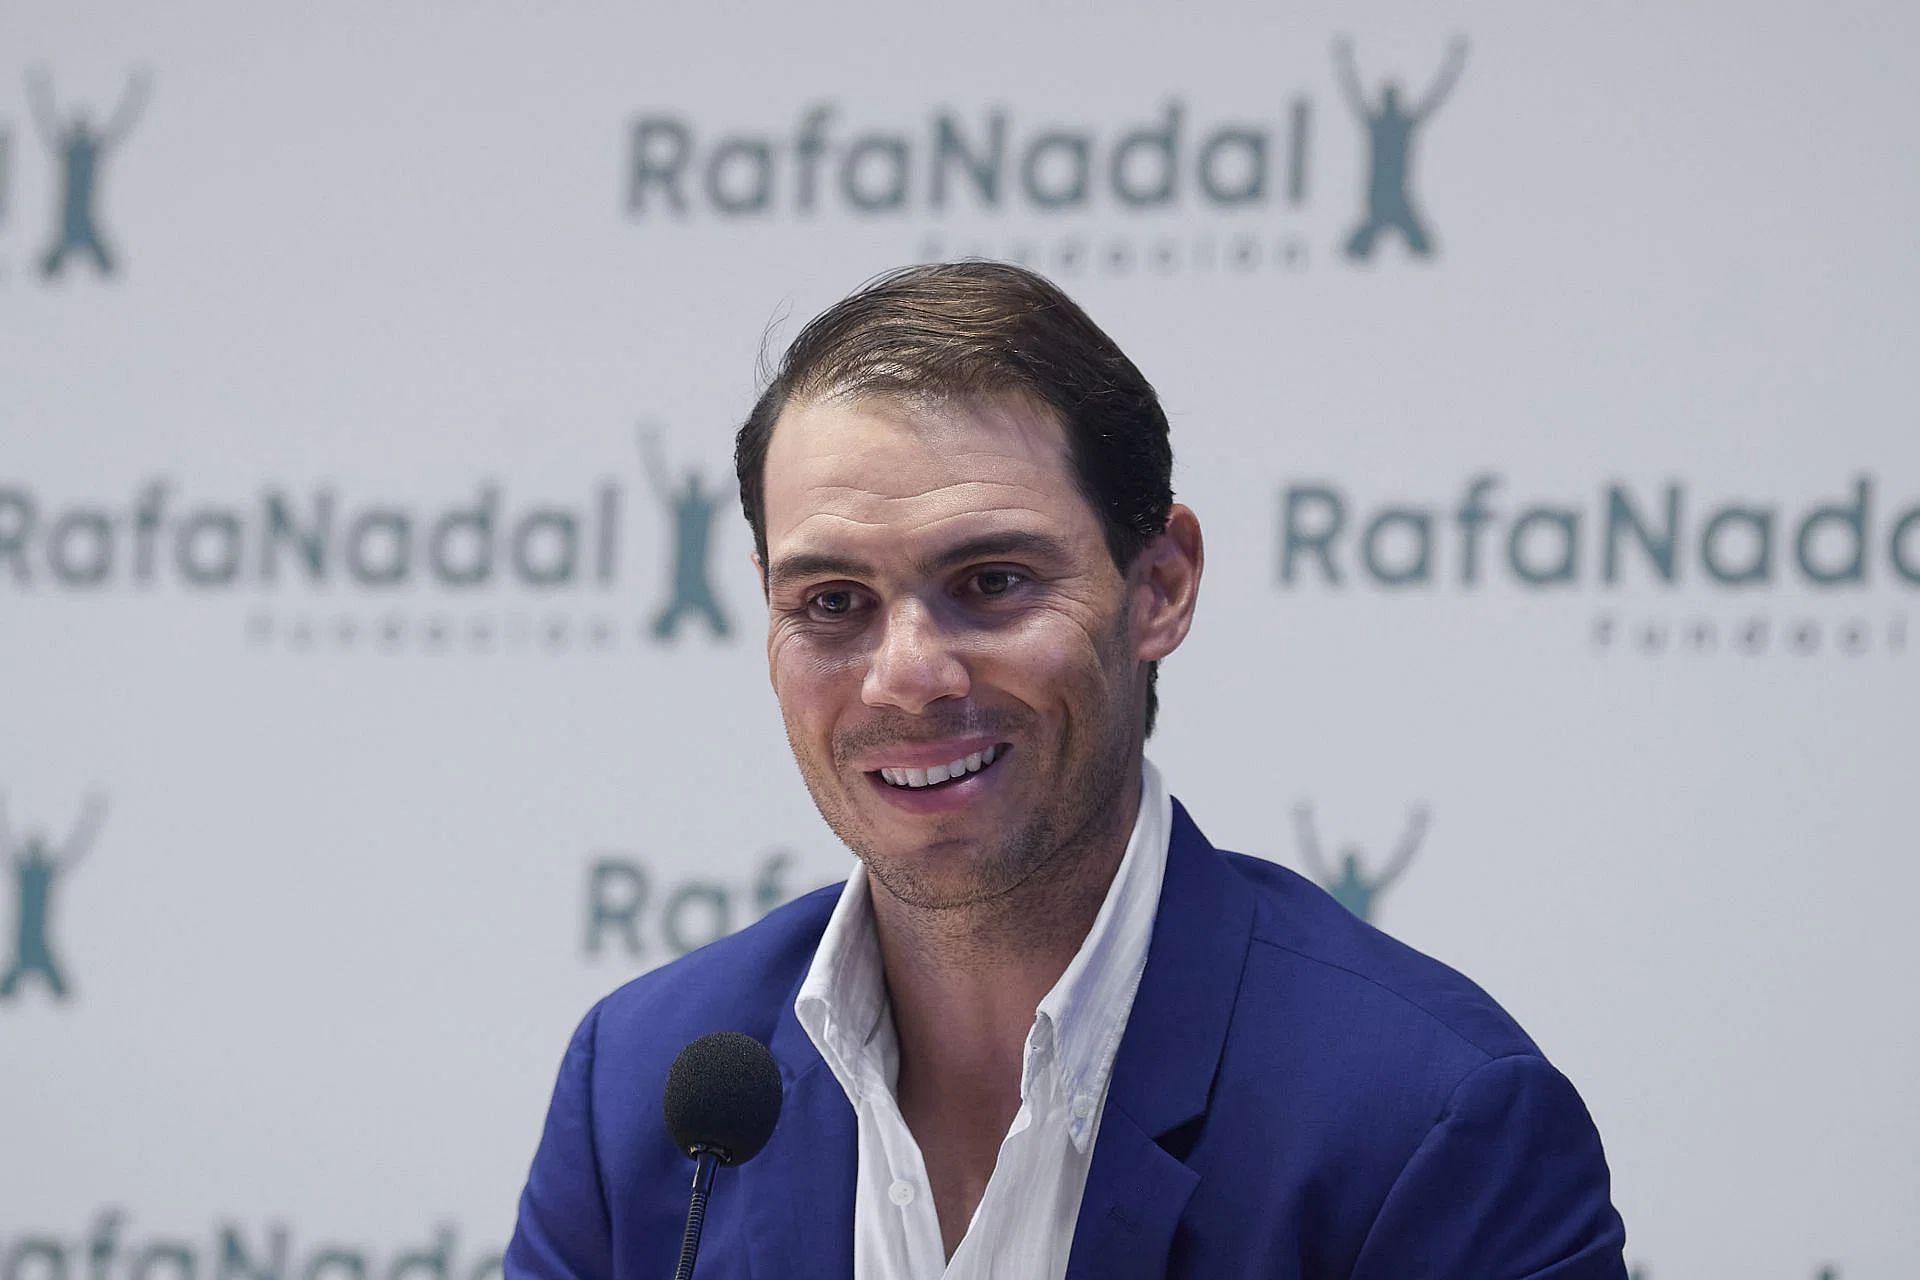 Rafael Nadal unveiled a new restaurant in Madrid under the Mabel Capital group